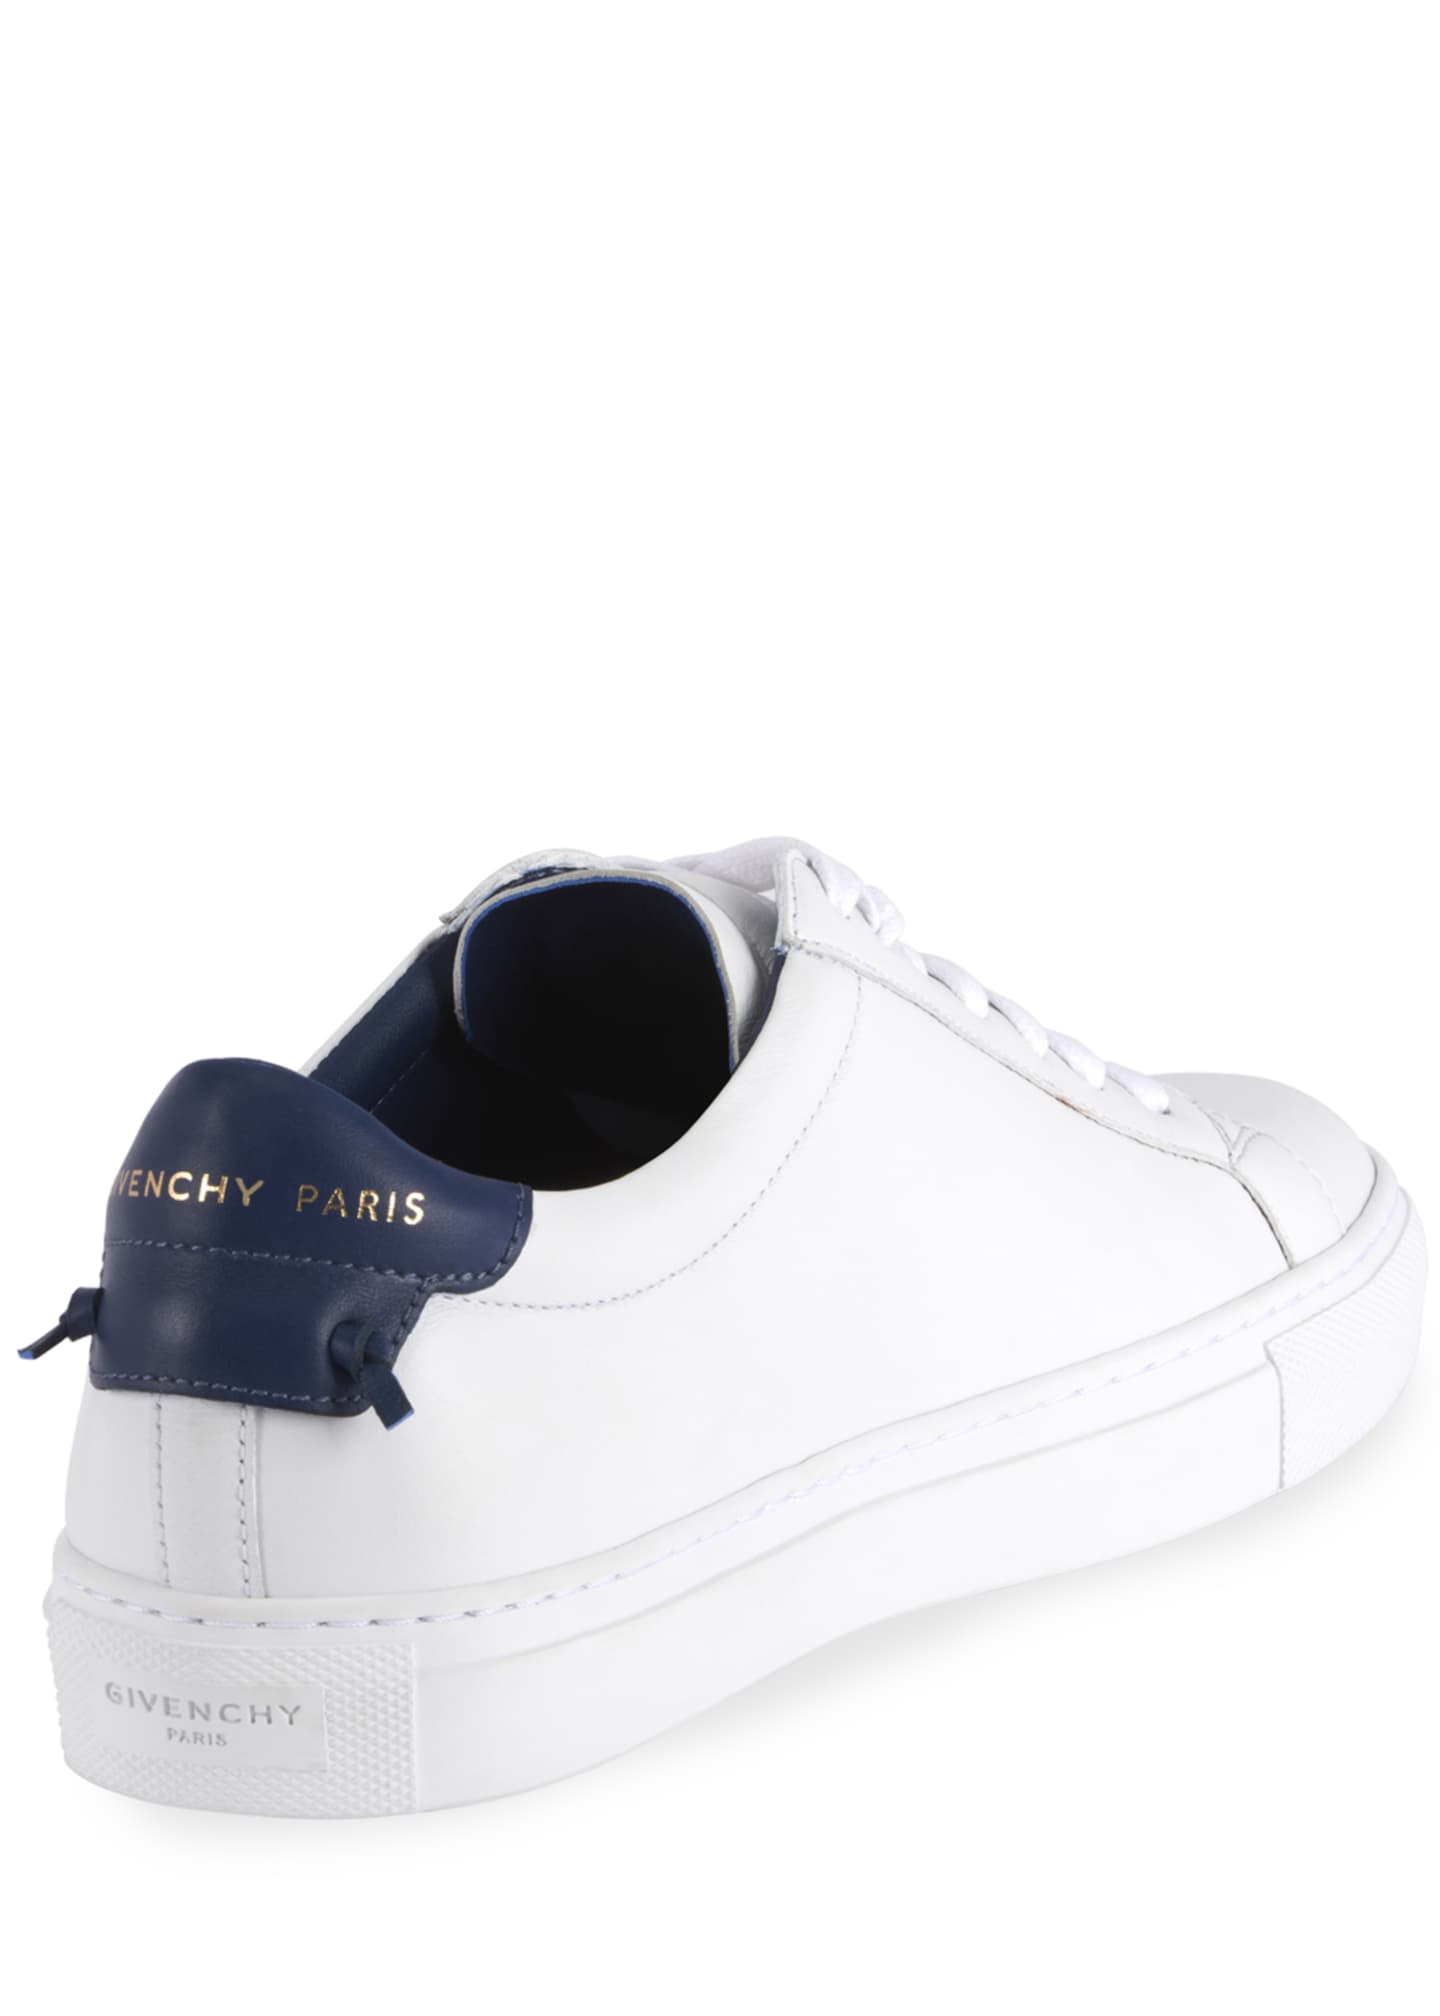 Givenchy Urban Street Leather Low Sneakers - Bergdorf Goodman